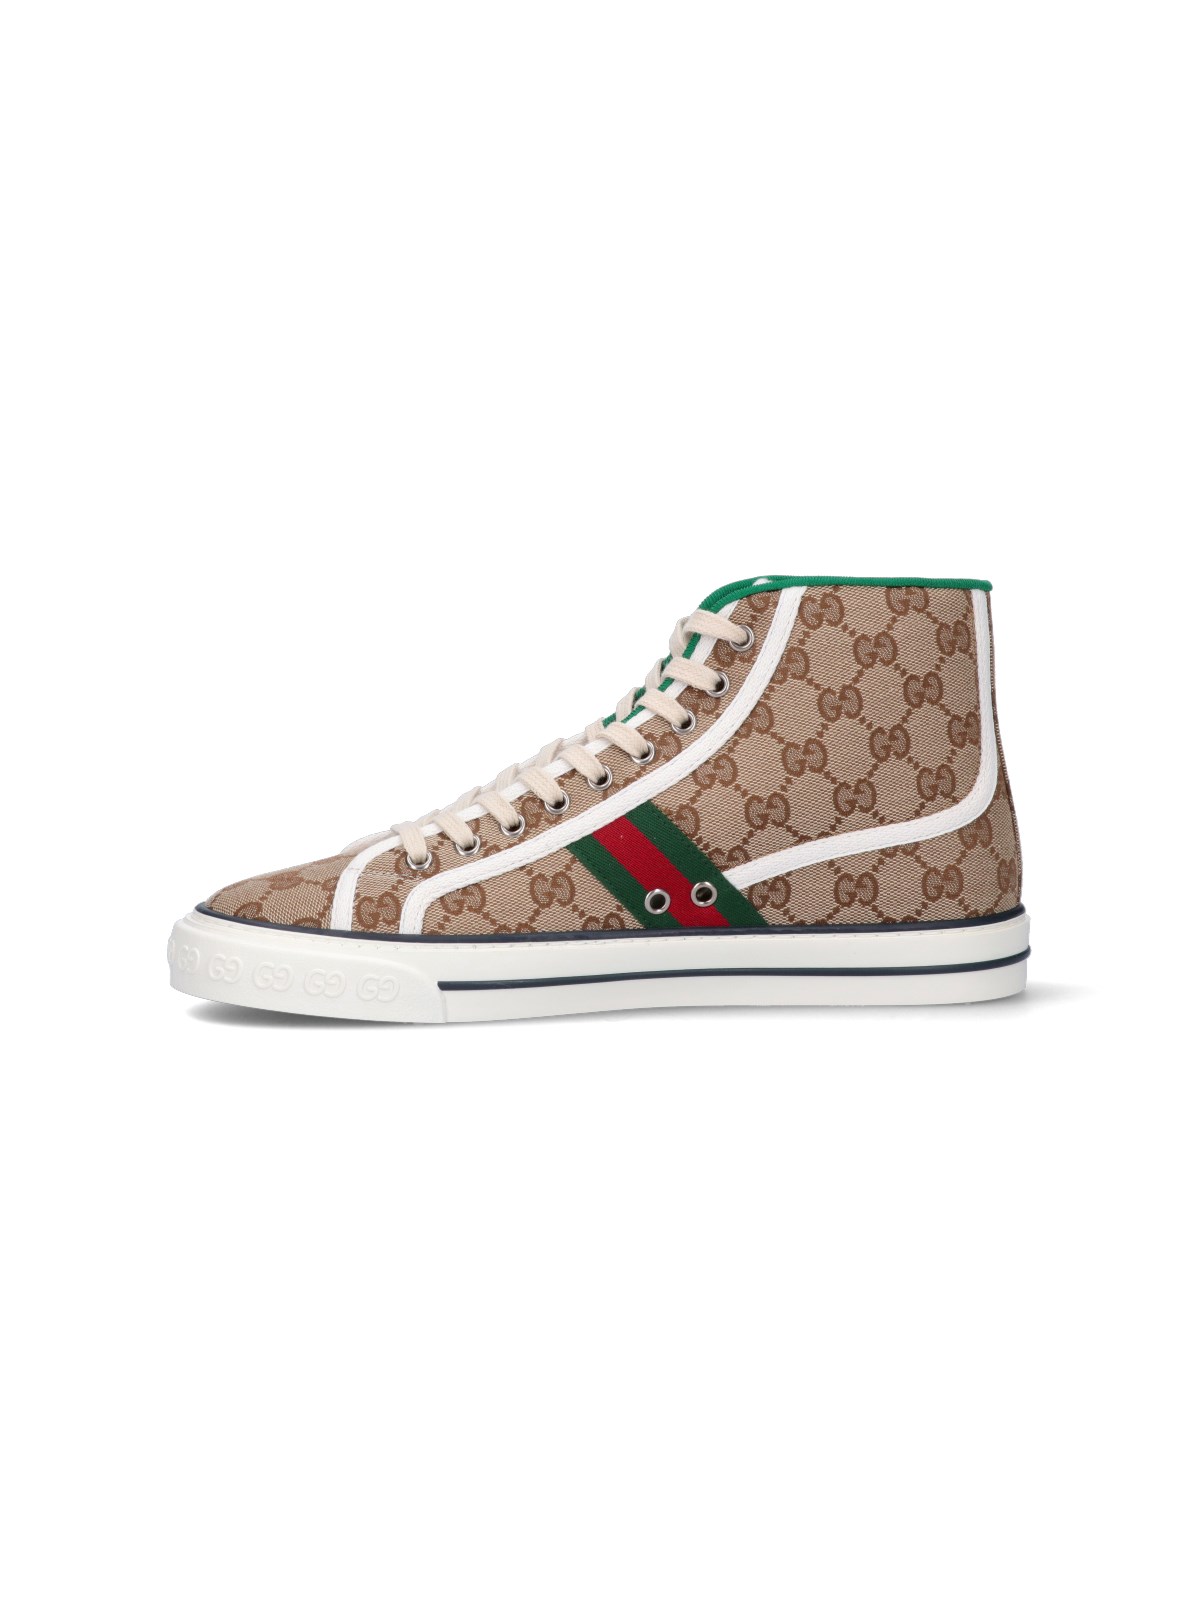 Gucci 'tennis 1977' high top sneakers available on SUGAR - 120064